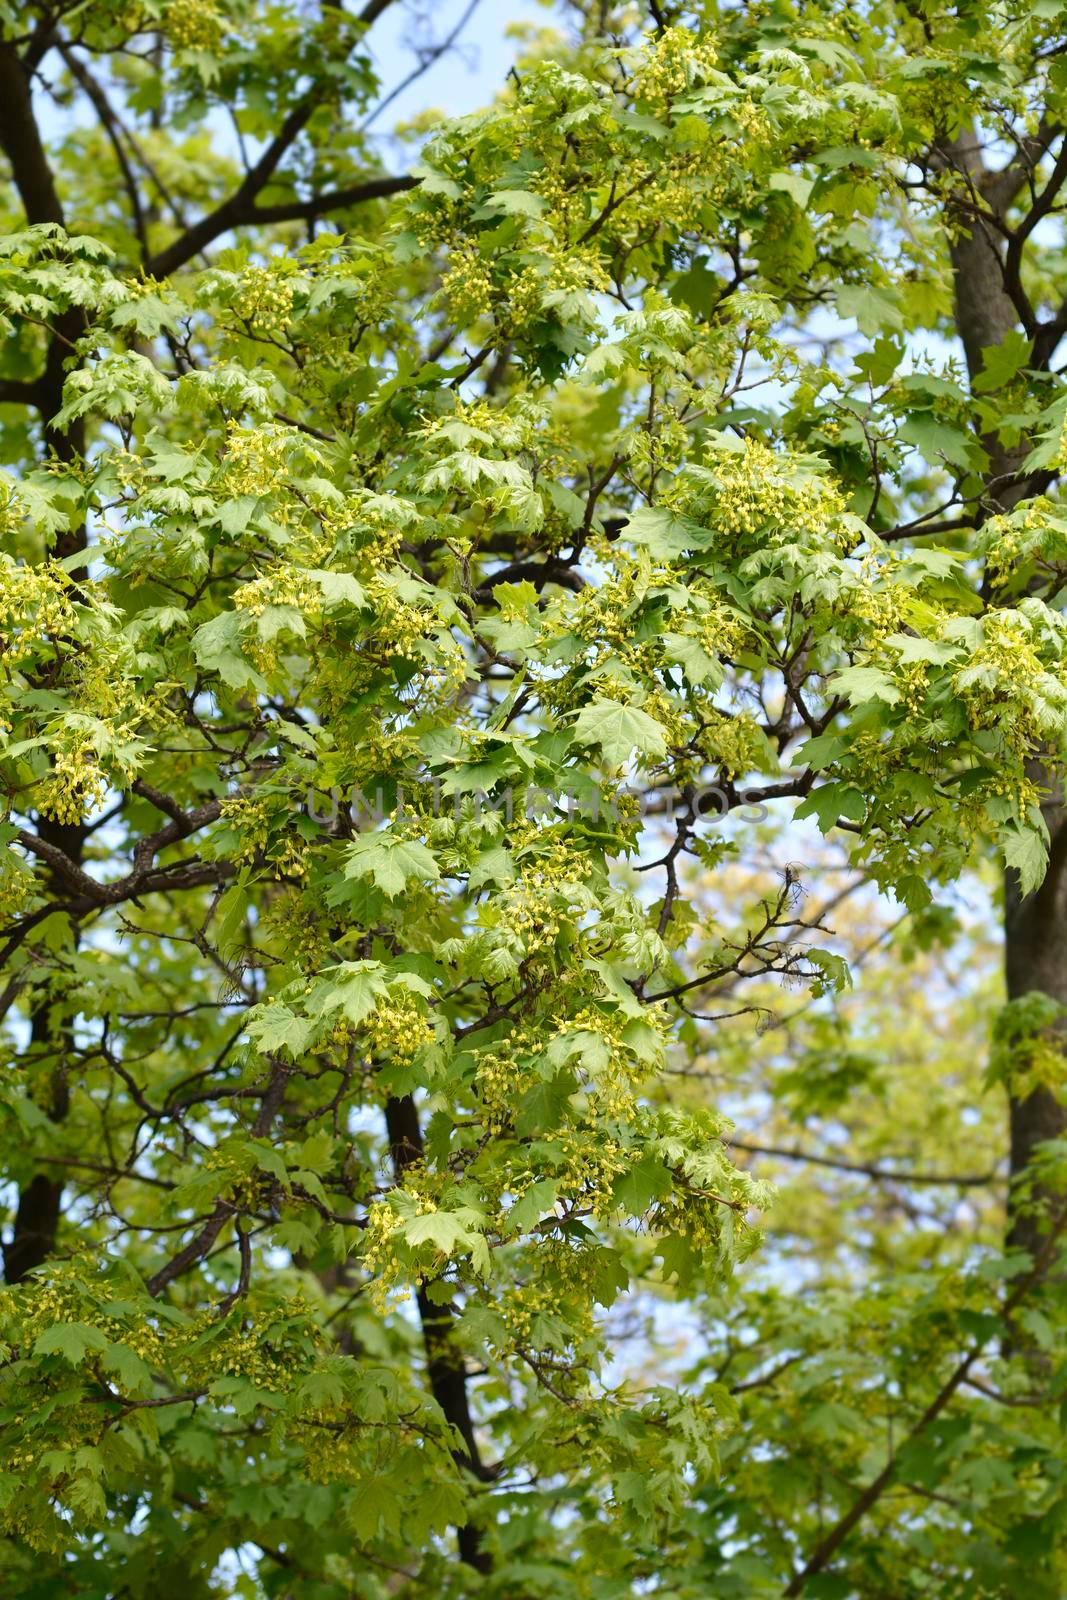 Norway maple branches with flowers - Latin name - Acer platanoides